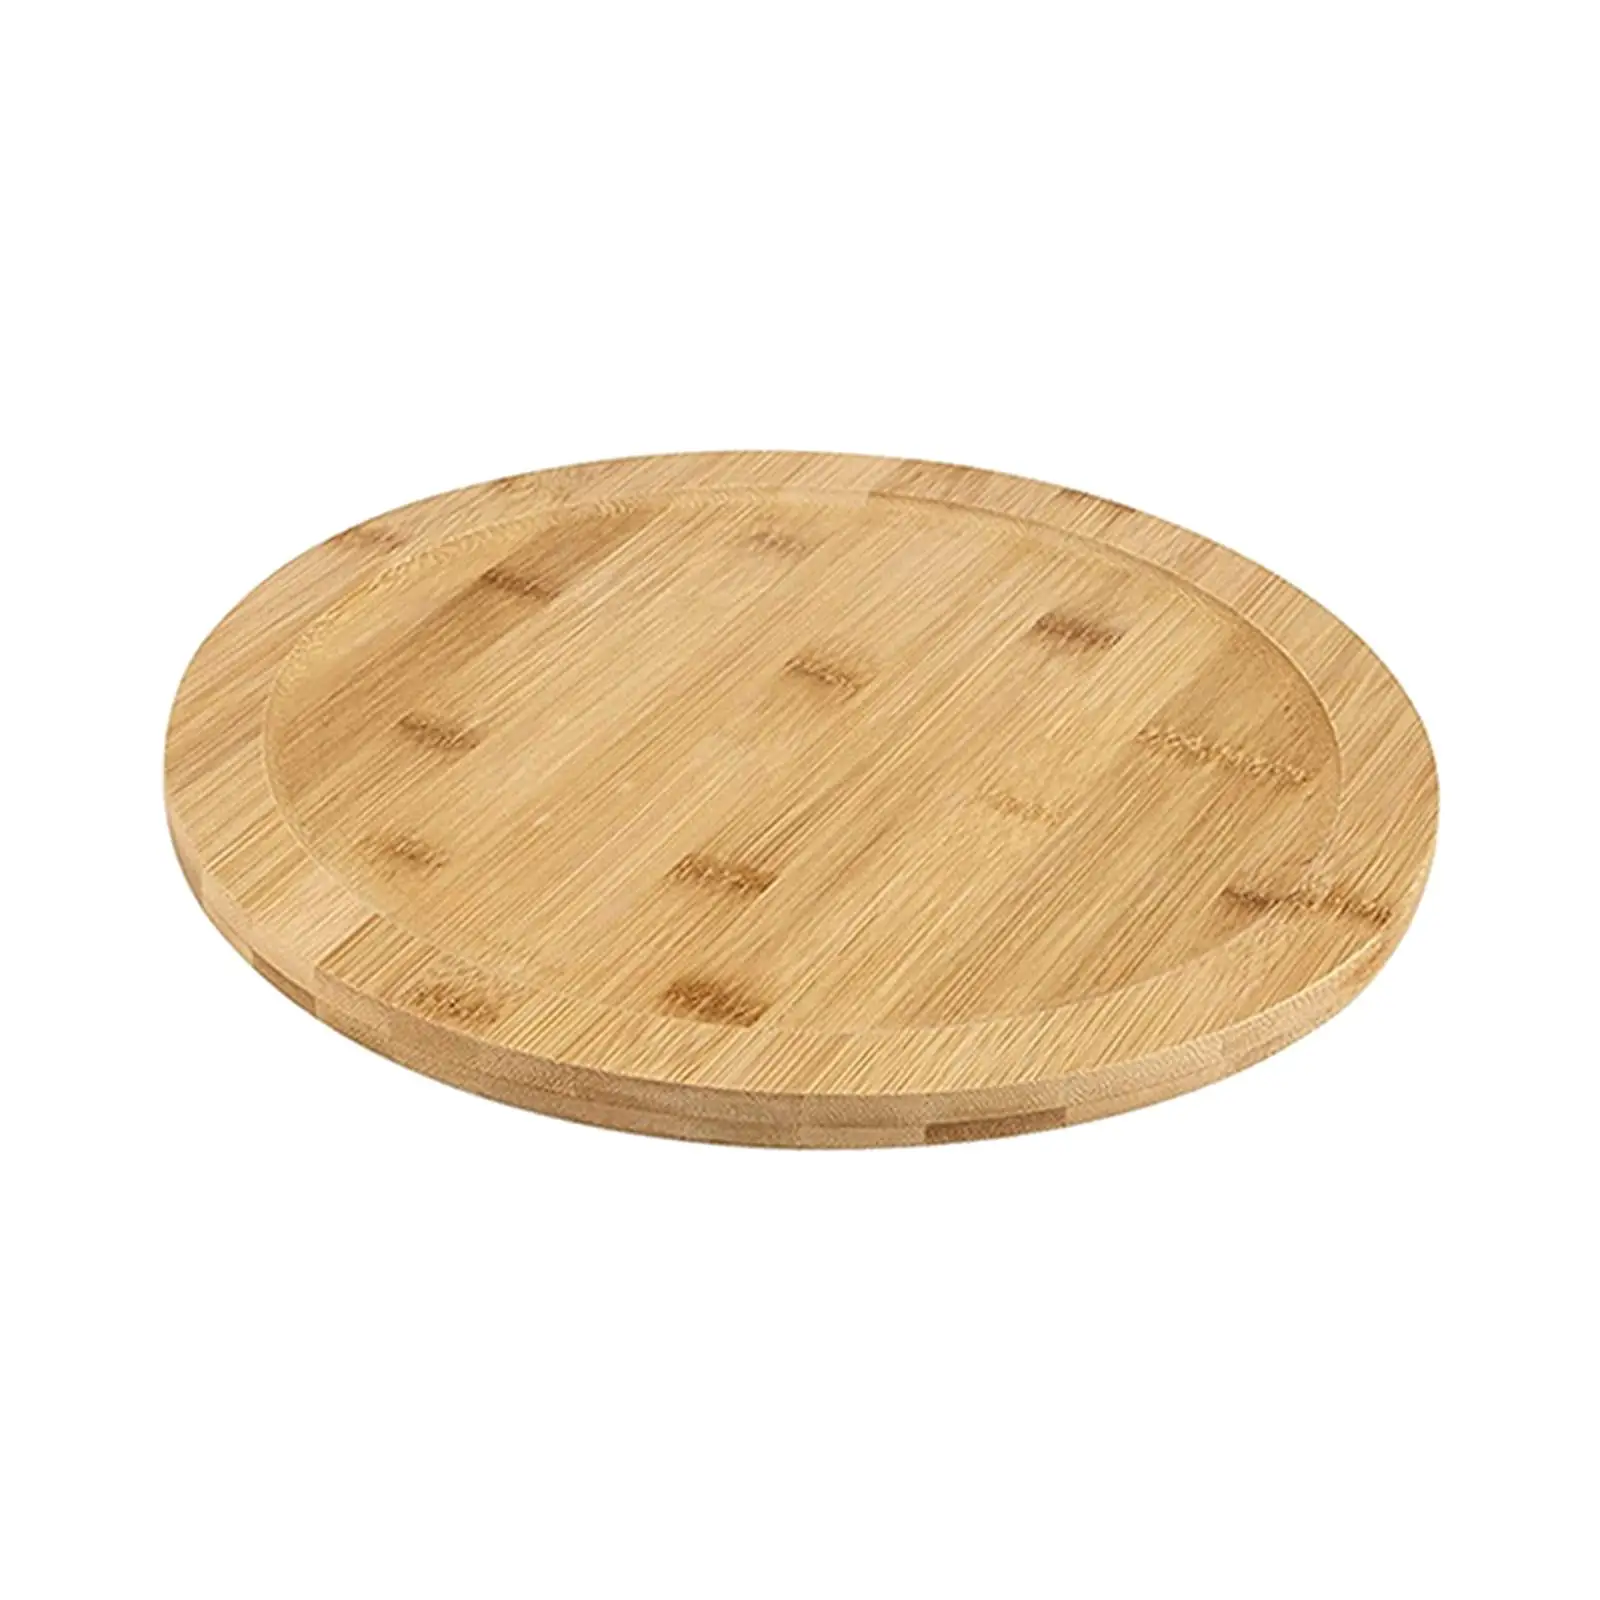 Wooden Round Rotating Plate Cake Stand Pizza Serving Board Rotating Wooden Tray for Dining Table Cabinet Pantry Kitchen Home